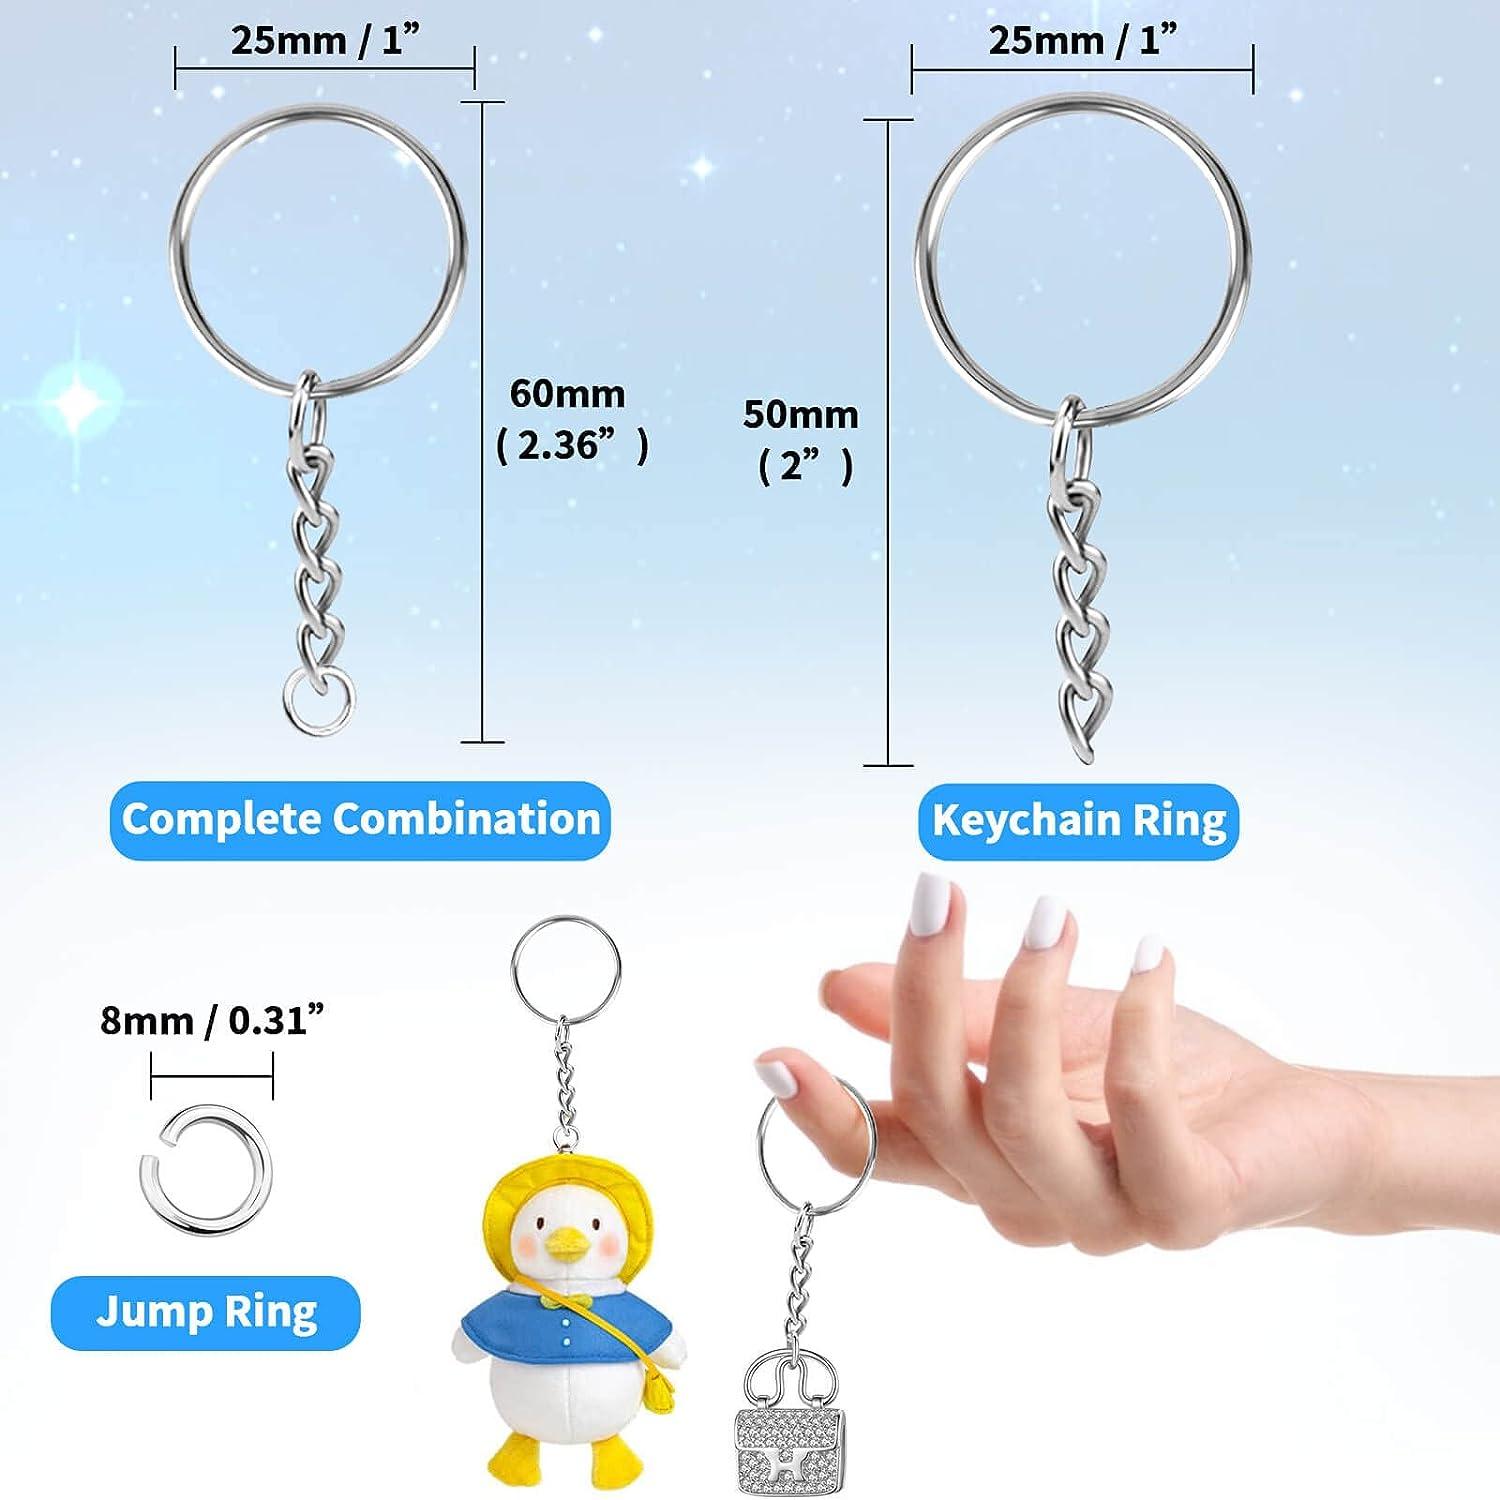 Keychain Making Supplies 50pcs Keychains With Chain And 50 Pcs